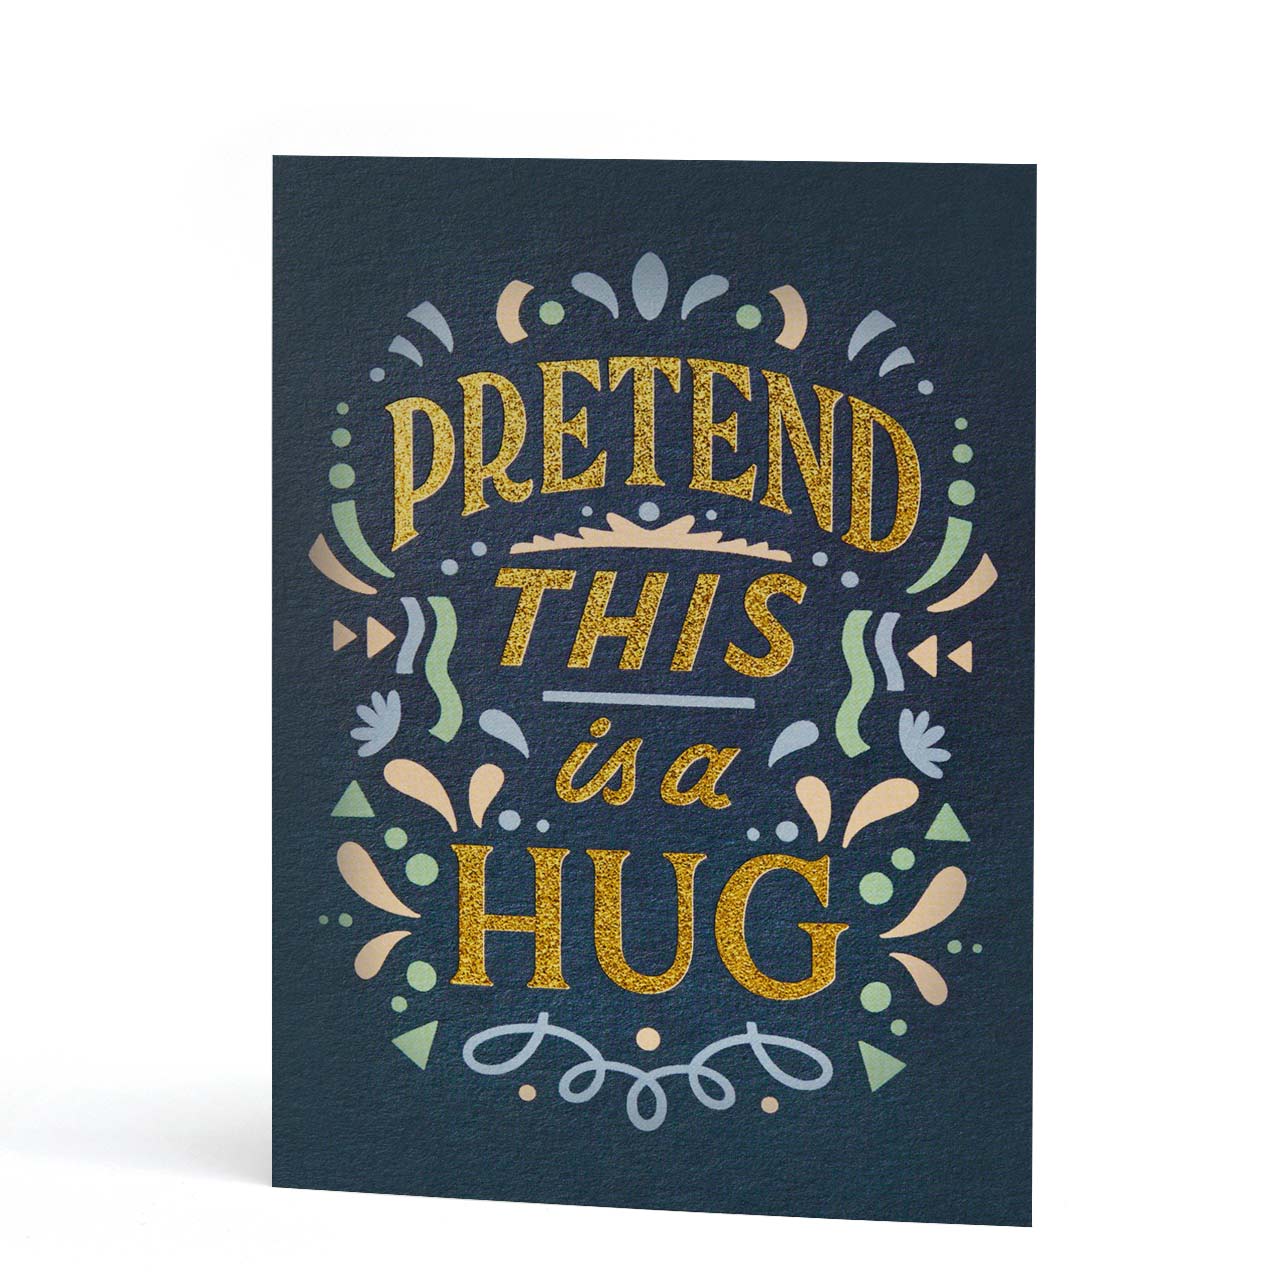 Pretend This is a Hug Gold Foil Greeting Card